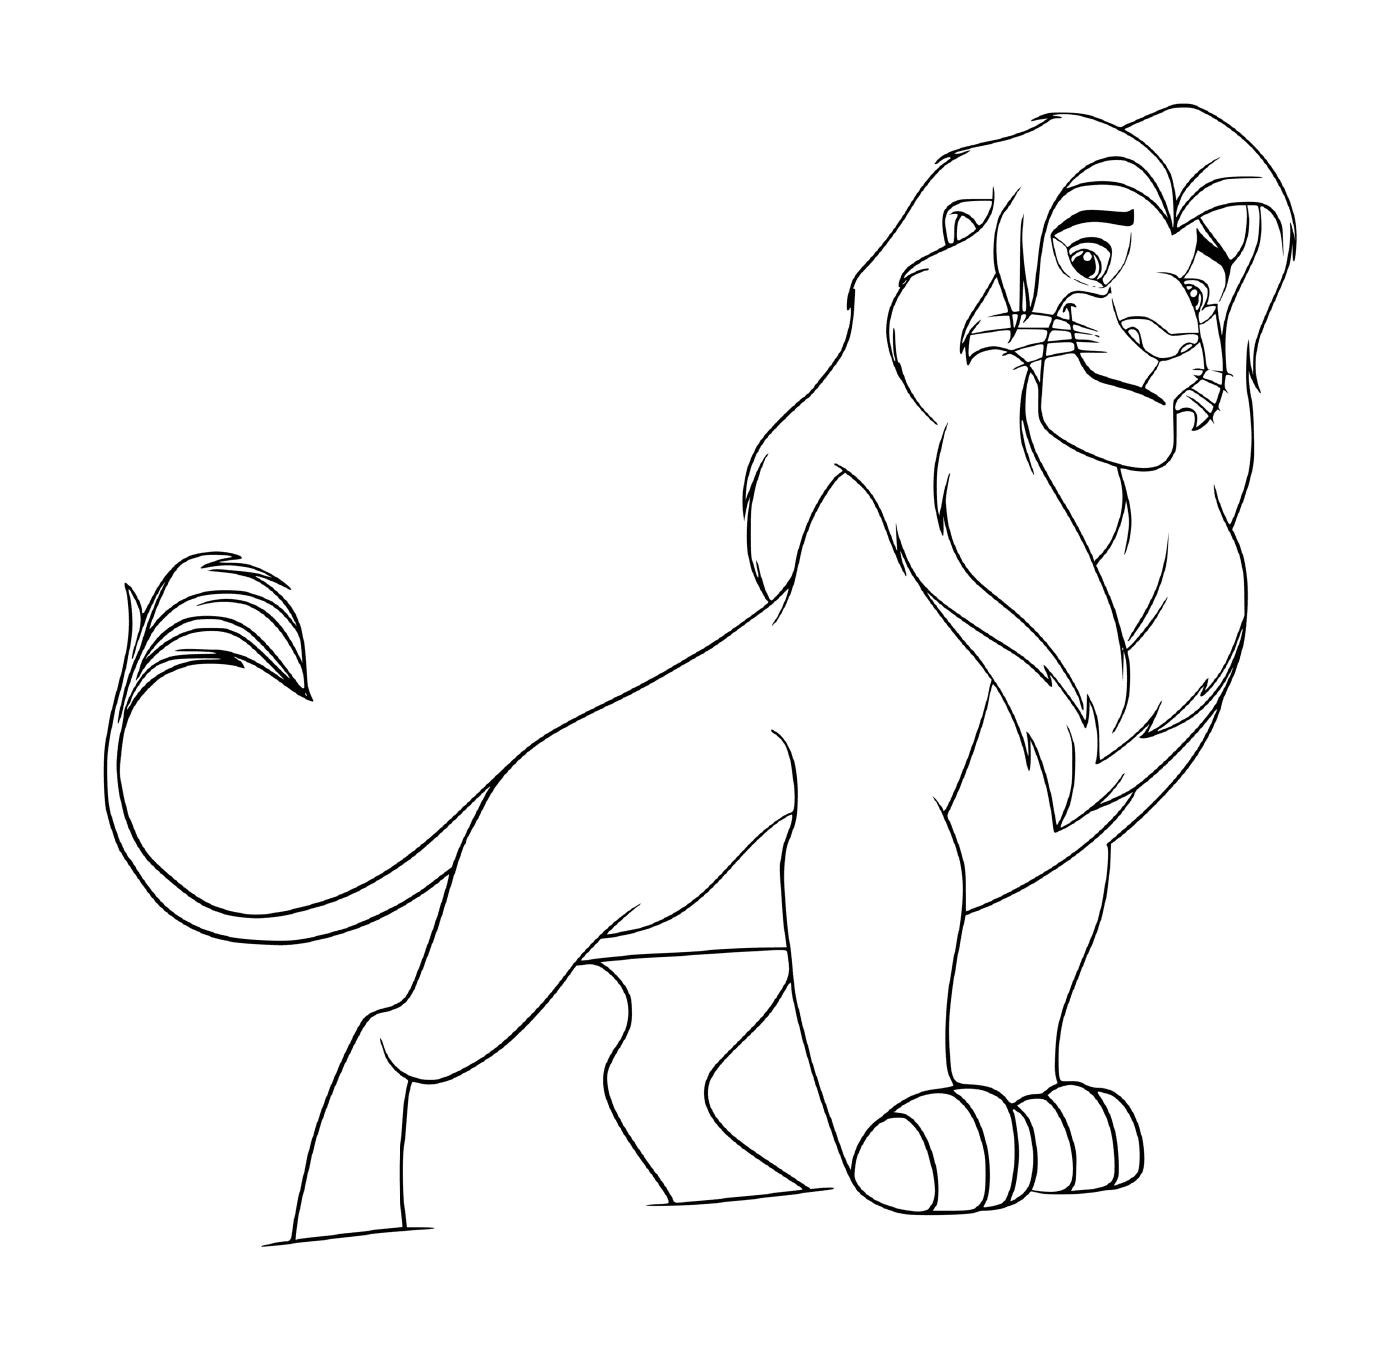  Simba, the great lion king 